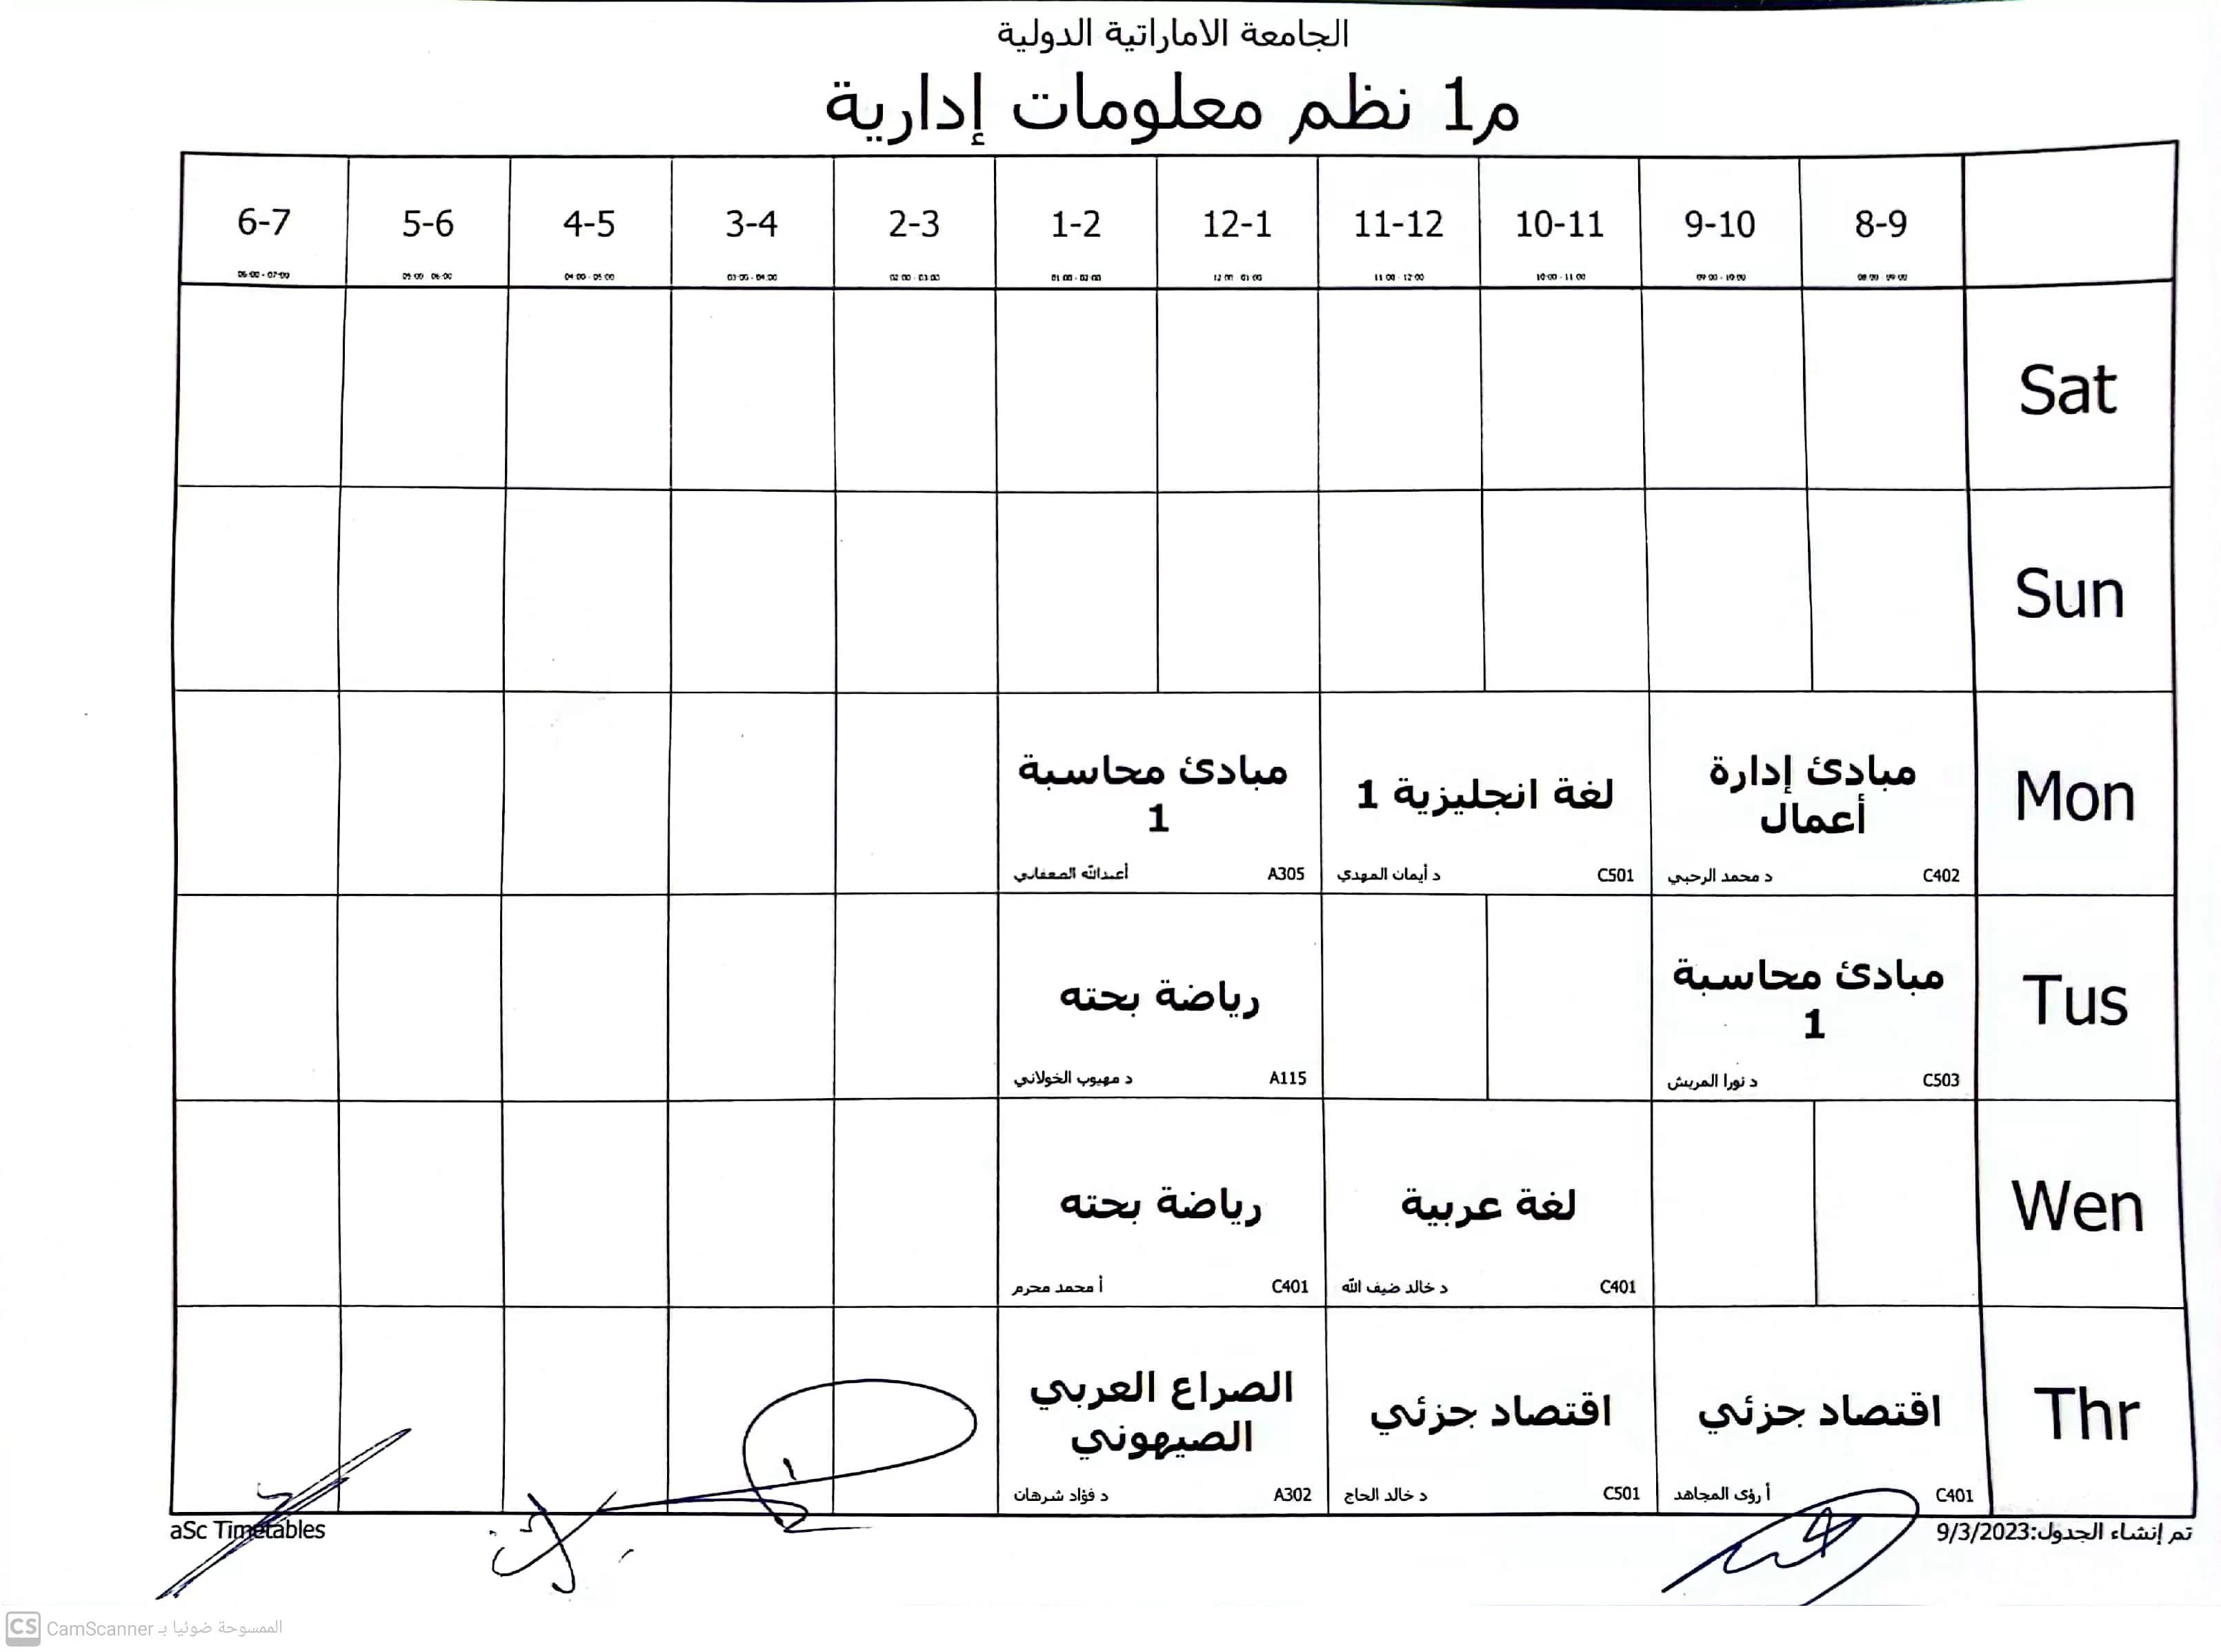 Academic schedules for the majors of the Faculty of Administrative and Financial Sciences